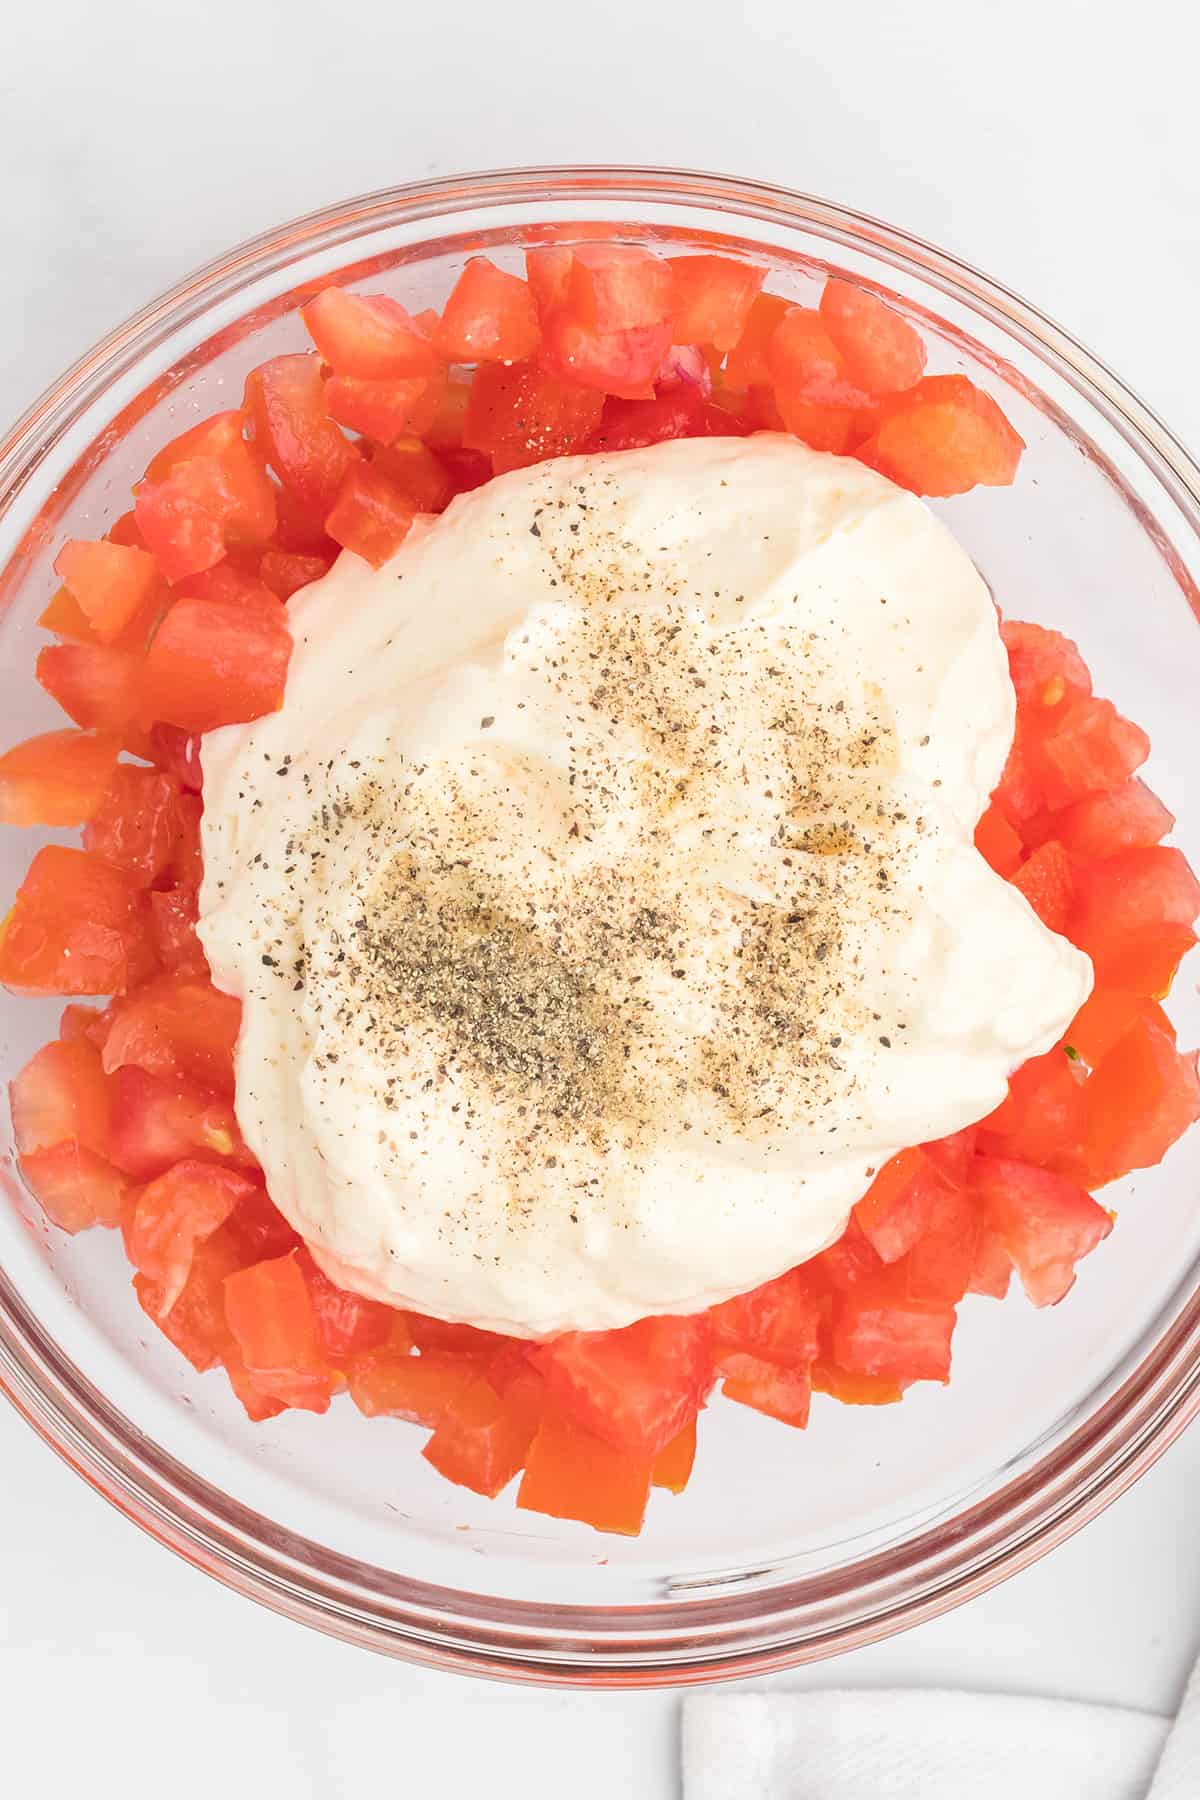 Diced tomatoes with mayonnaise on top.